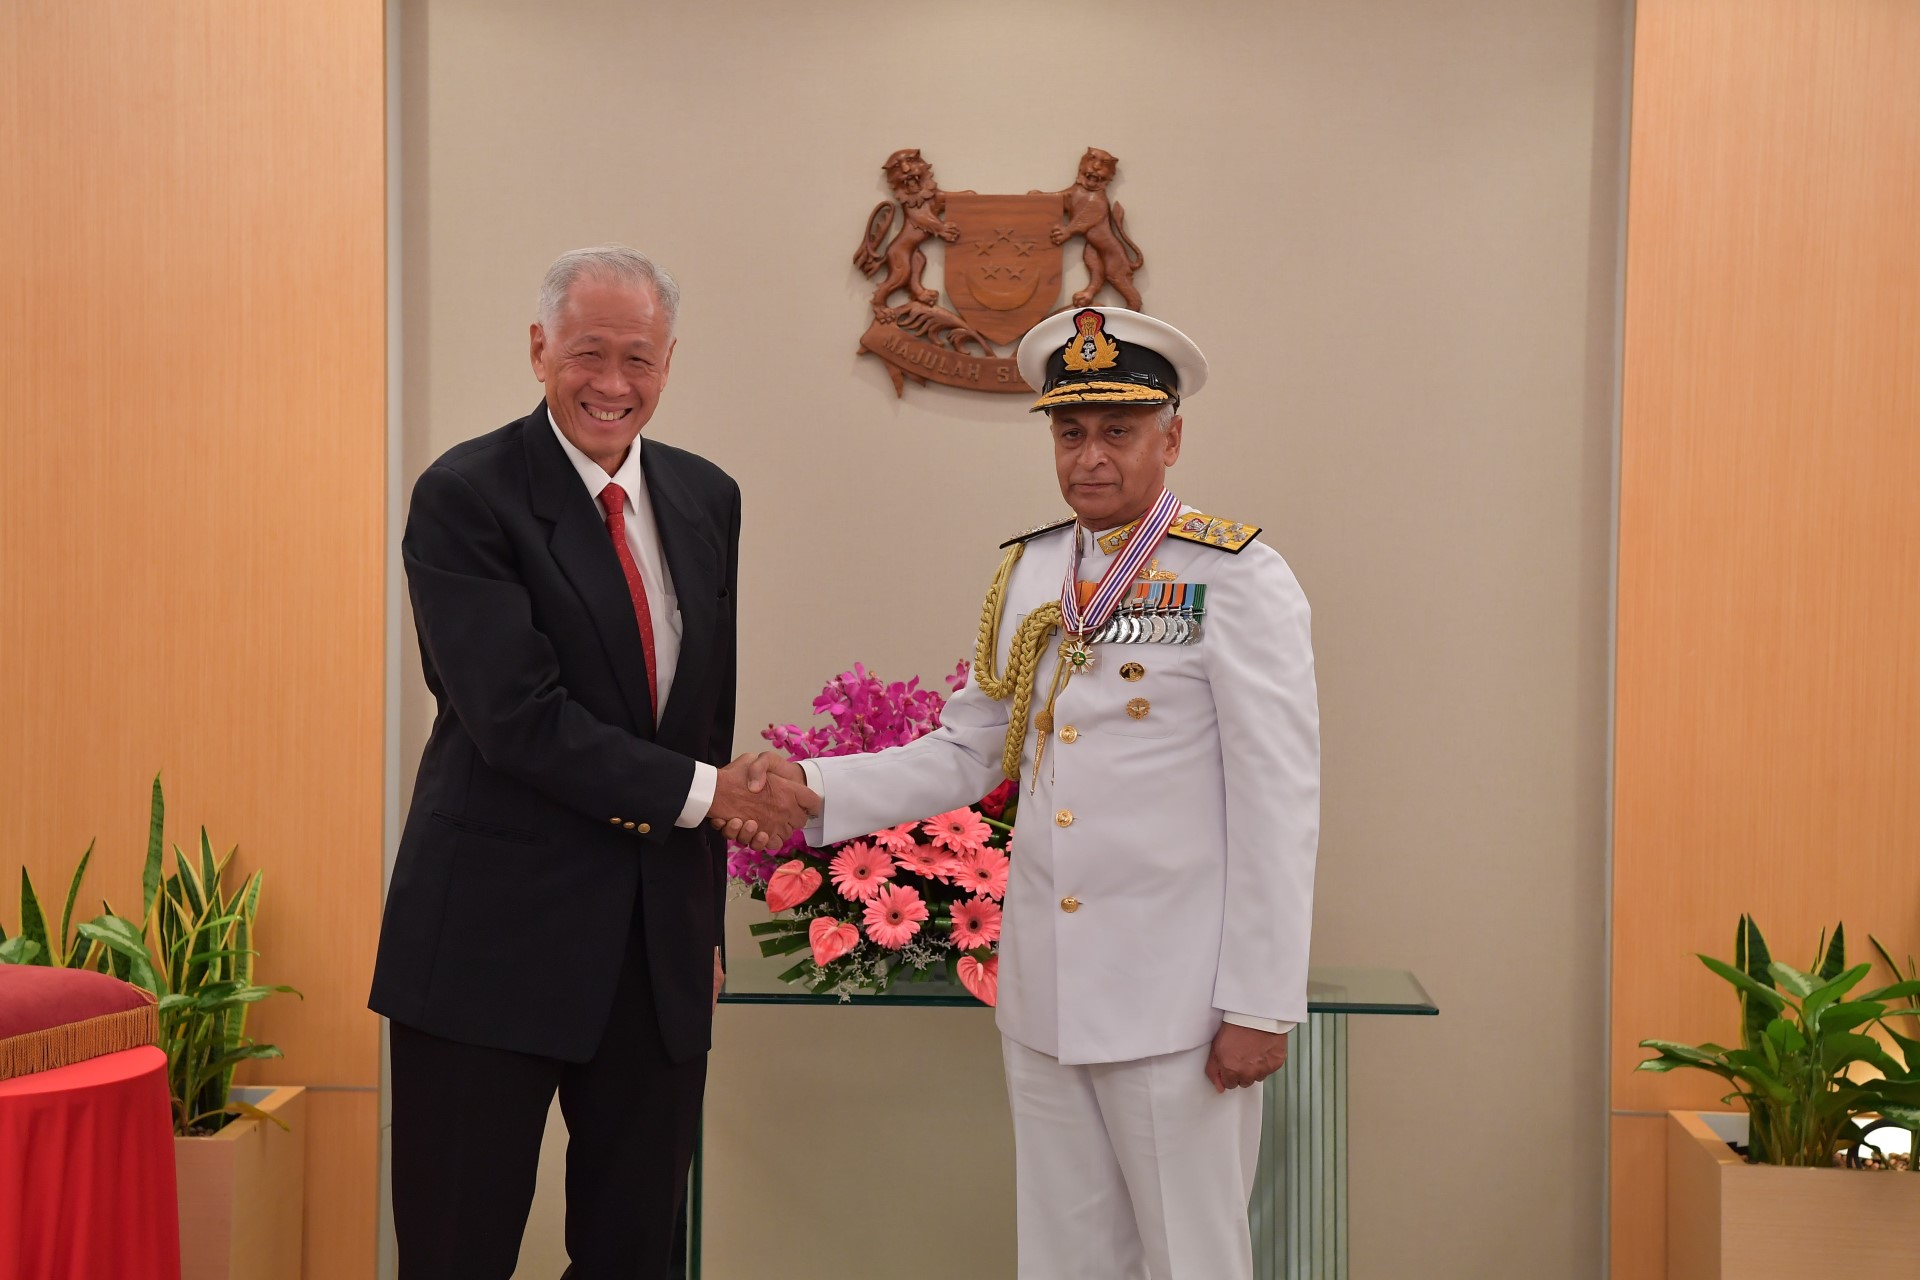 The former India Chief of Naval Staff Admiral [ADM(Ret)] Sunil Lanba was presented the Meritorious Service Medal (Military) by Minister for Defence Dr Ng Eng Hen at the Ministry of Defence (MINDEF) this morning. 